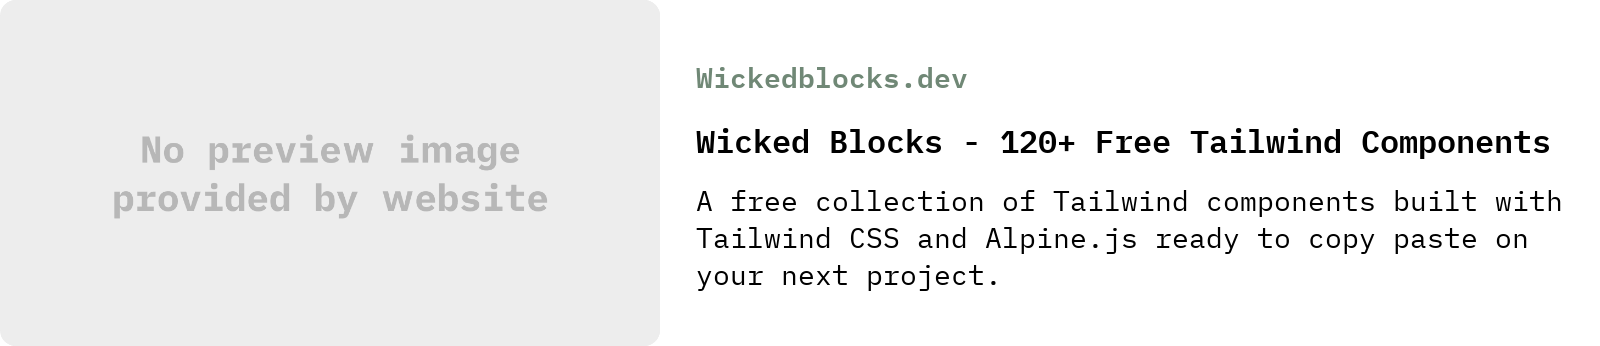 From Wickedblocks.dev: Wicked Blocks - 120+ Free Tailwind Components | A free collection of Tailwind components built with Tailwind CSS and Alpine.js ready to copy paste on your next project.